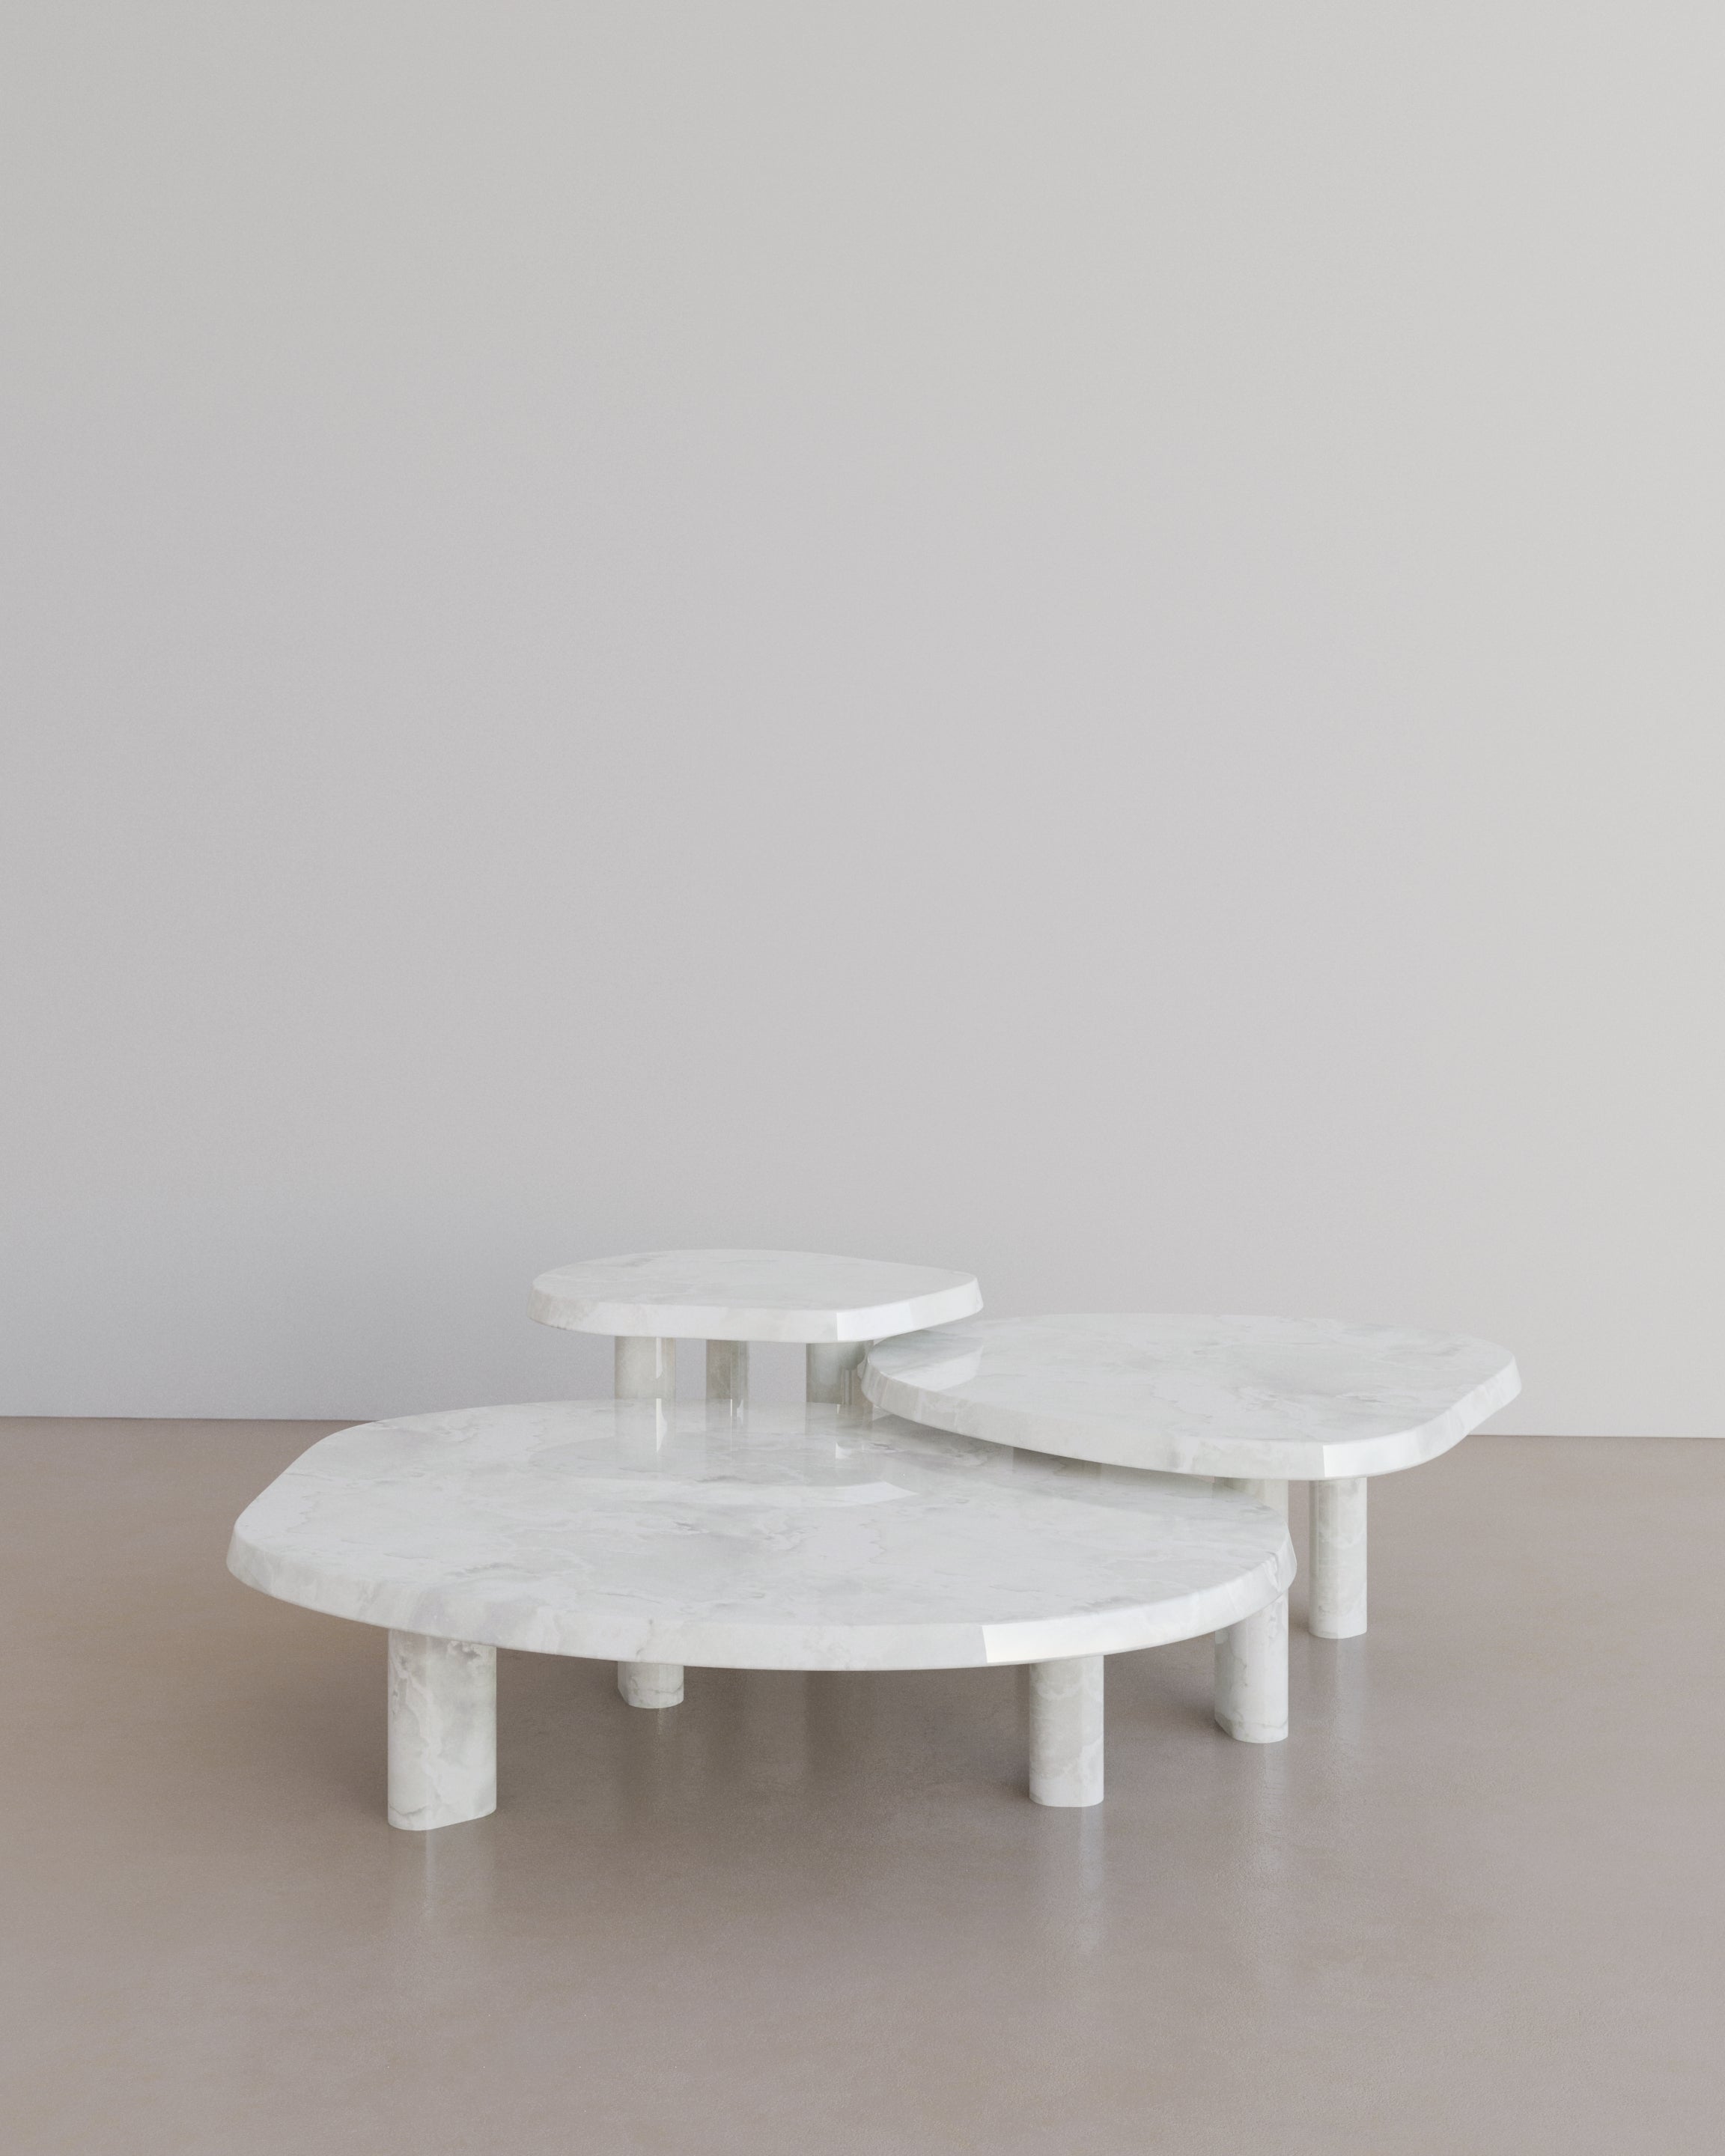 The Fiori Coffee Table in Nude Travertine by The Essentialist infers a delicate sense of organicism, a vision of sublime is born, revolutionising beauty and deifying stone in its truest expression. Fiori forges a perpetual statement of intuitive